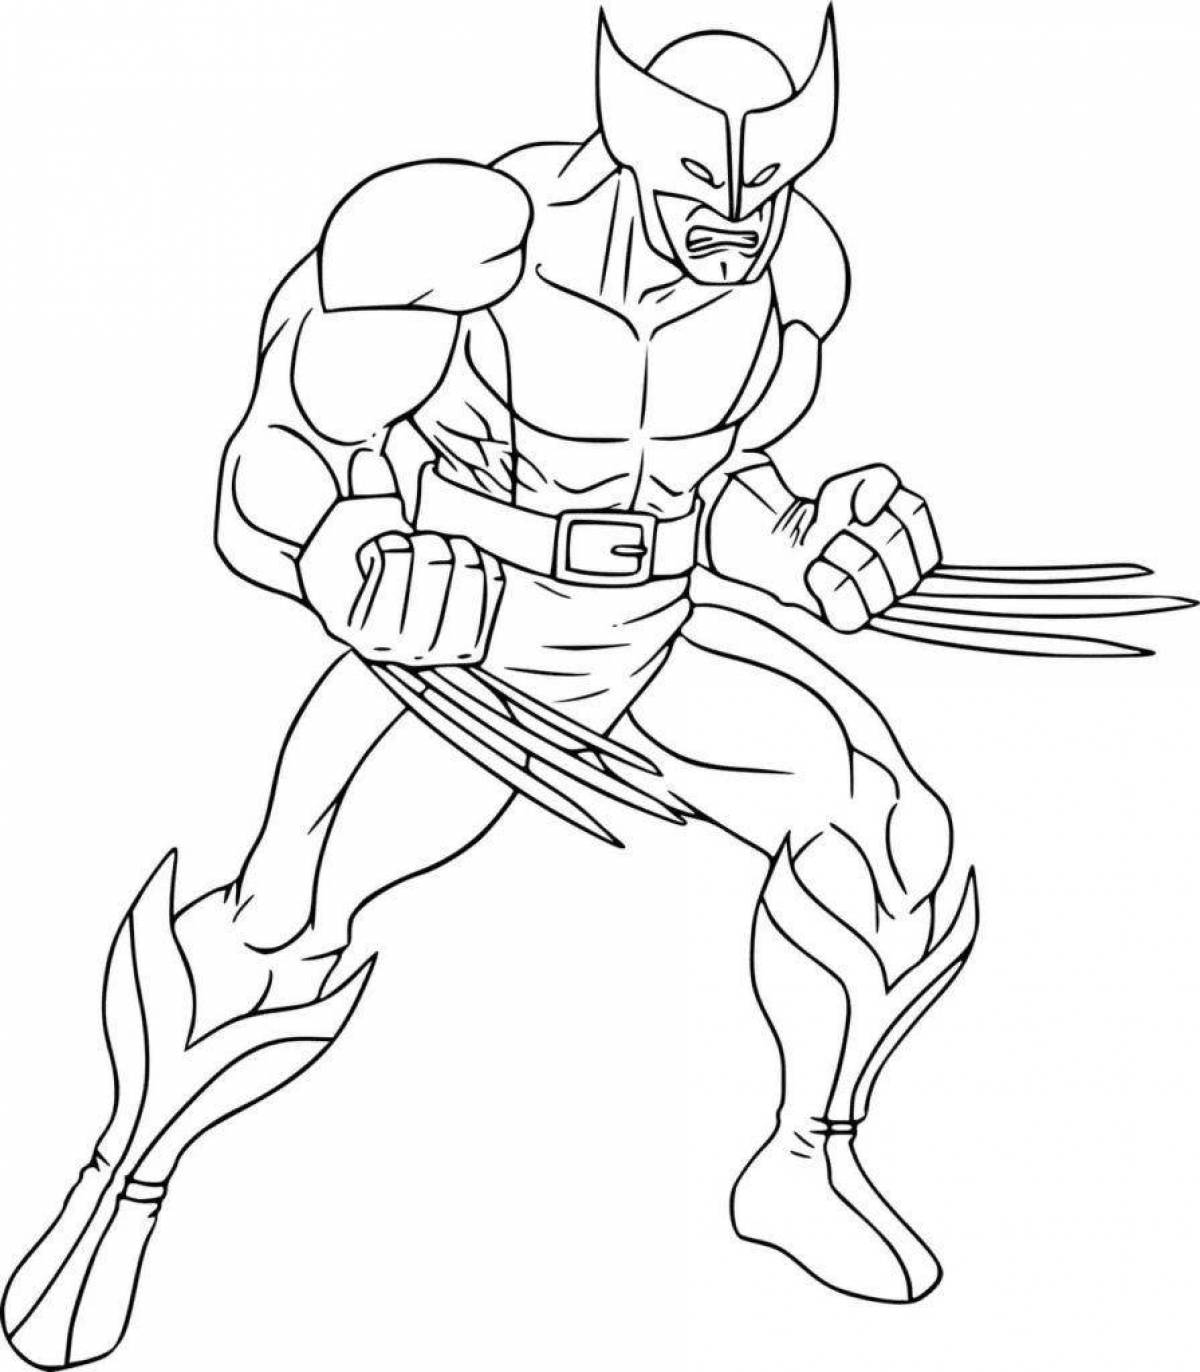 Playful superhero coloring page for 4-5 year olds